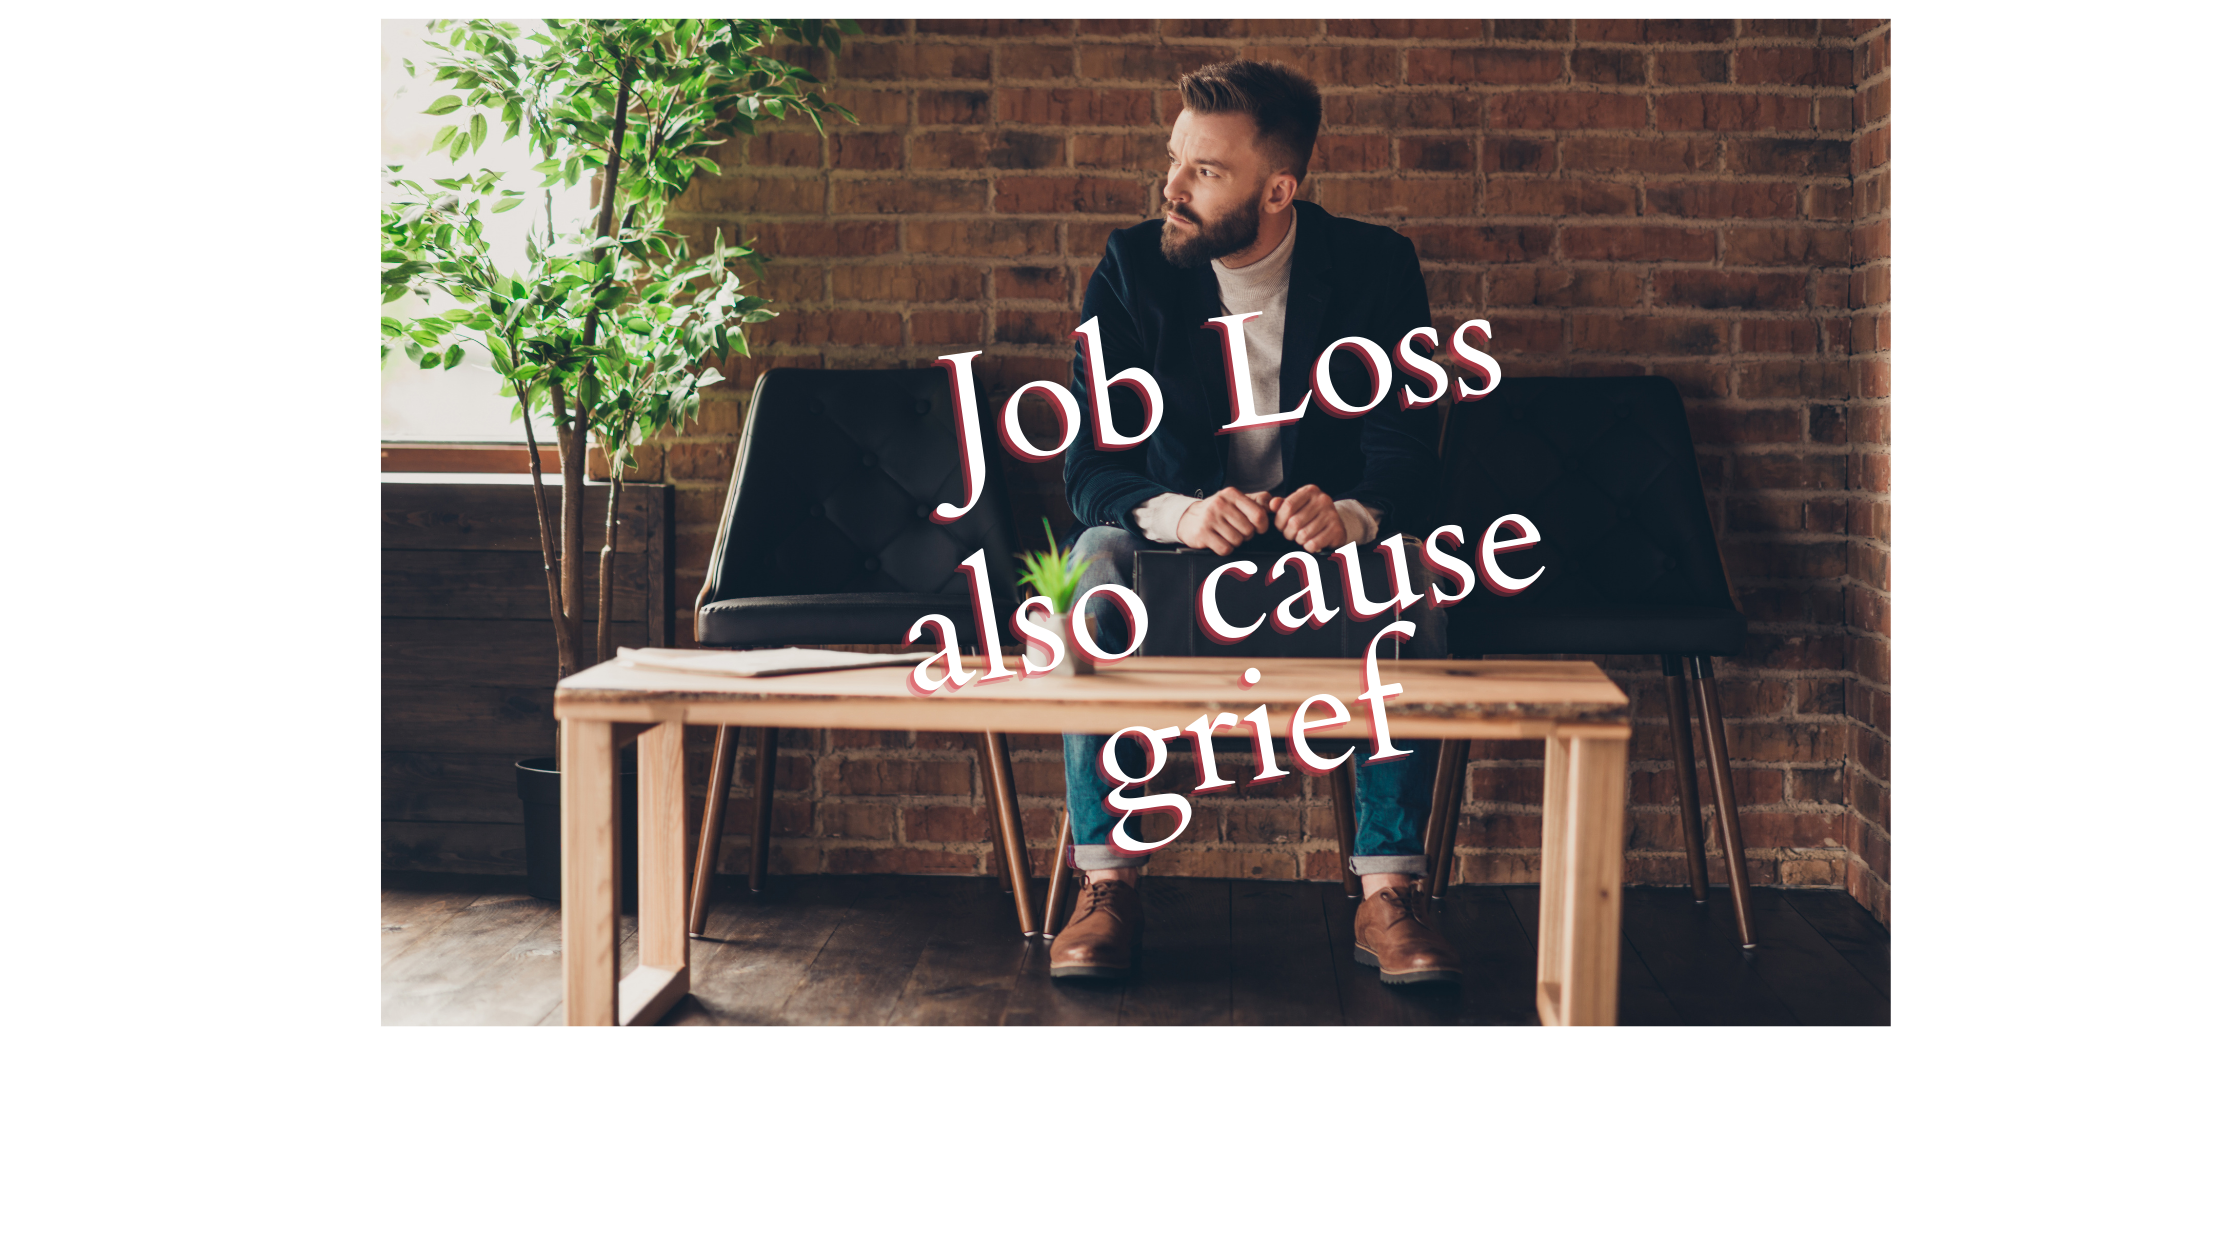 Job loss can cause grief